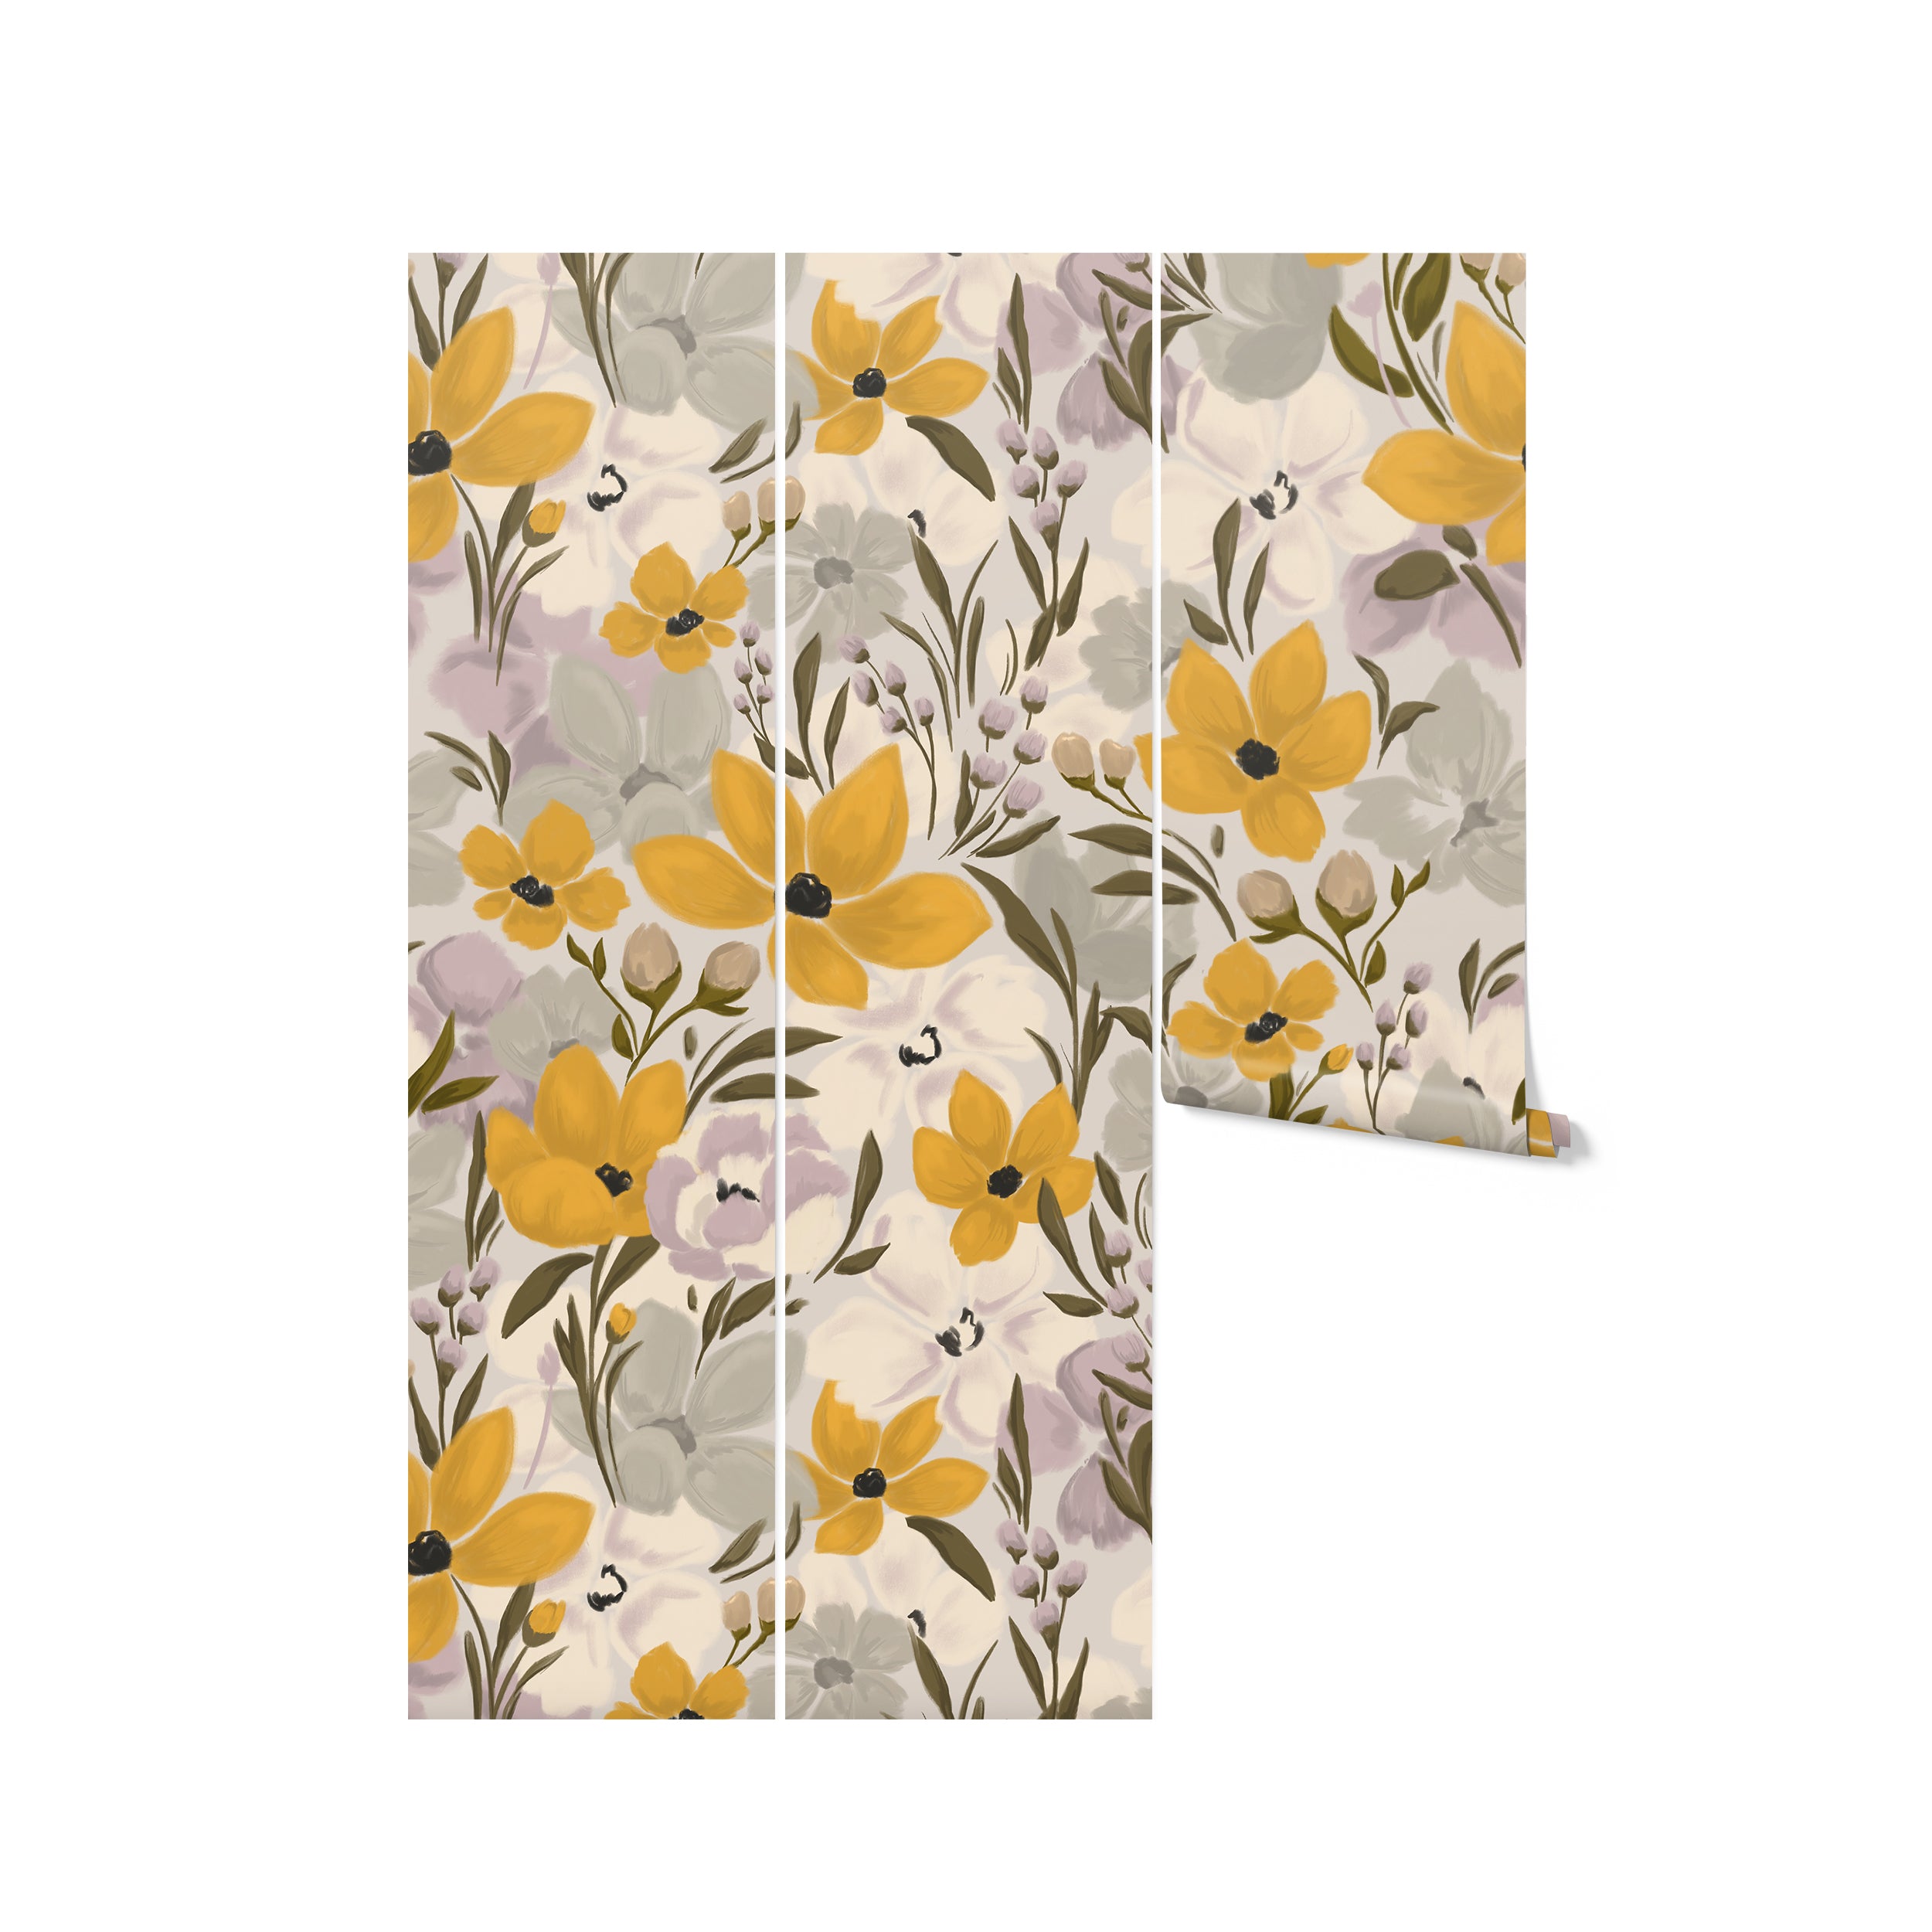 A partial view of the Yellow Fleur Wallpaper - 75" on three panel sections, illustrating the seamless continuity of the floral design across multiple sheets, with the lush yellow blooms and soft pastel accents bringing an elegant and cohesive look to the interior space.